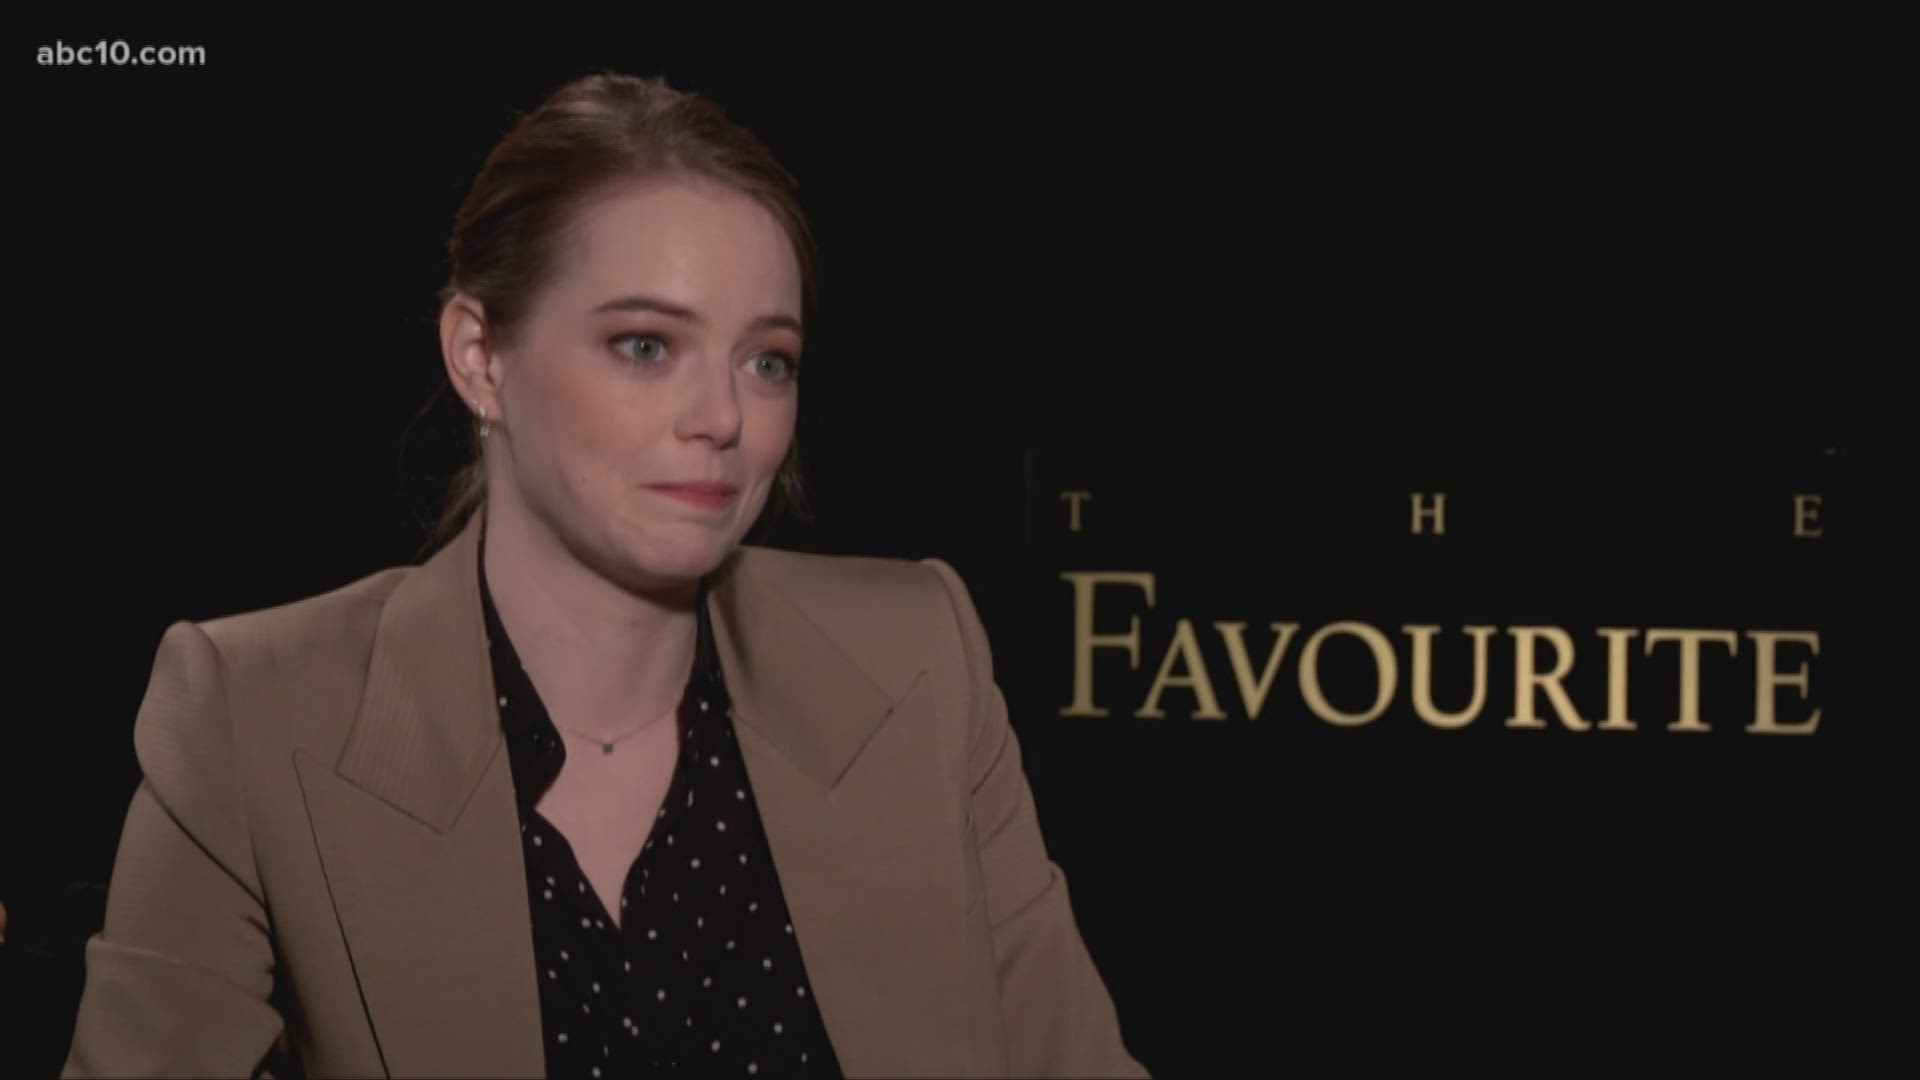 Mark S. Allen spoke with Oscar-winning actress Emma Stone about "The Favourite," a movie in which she's nominated for best supporting actress.